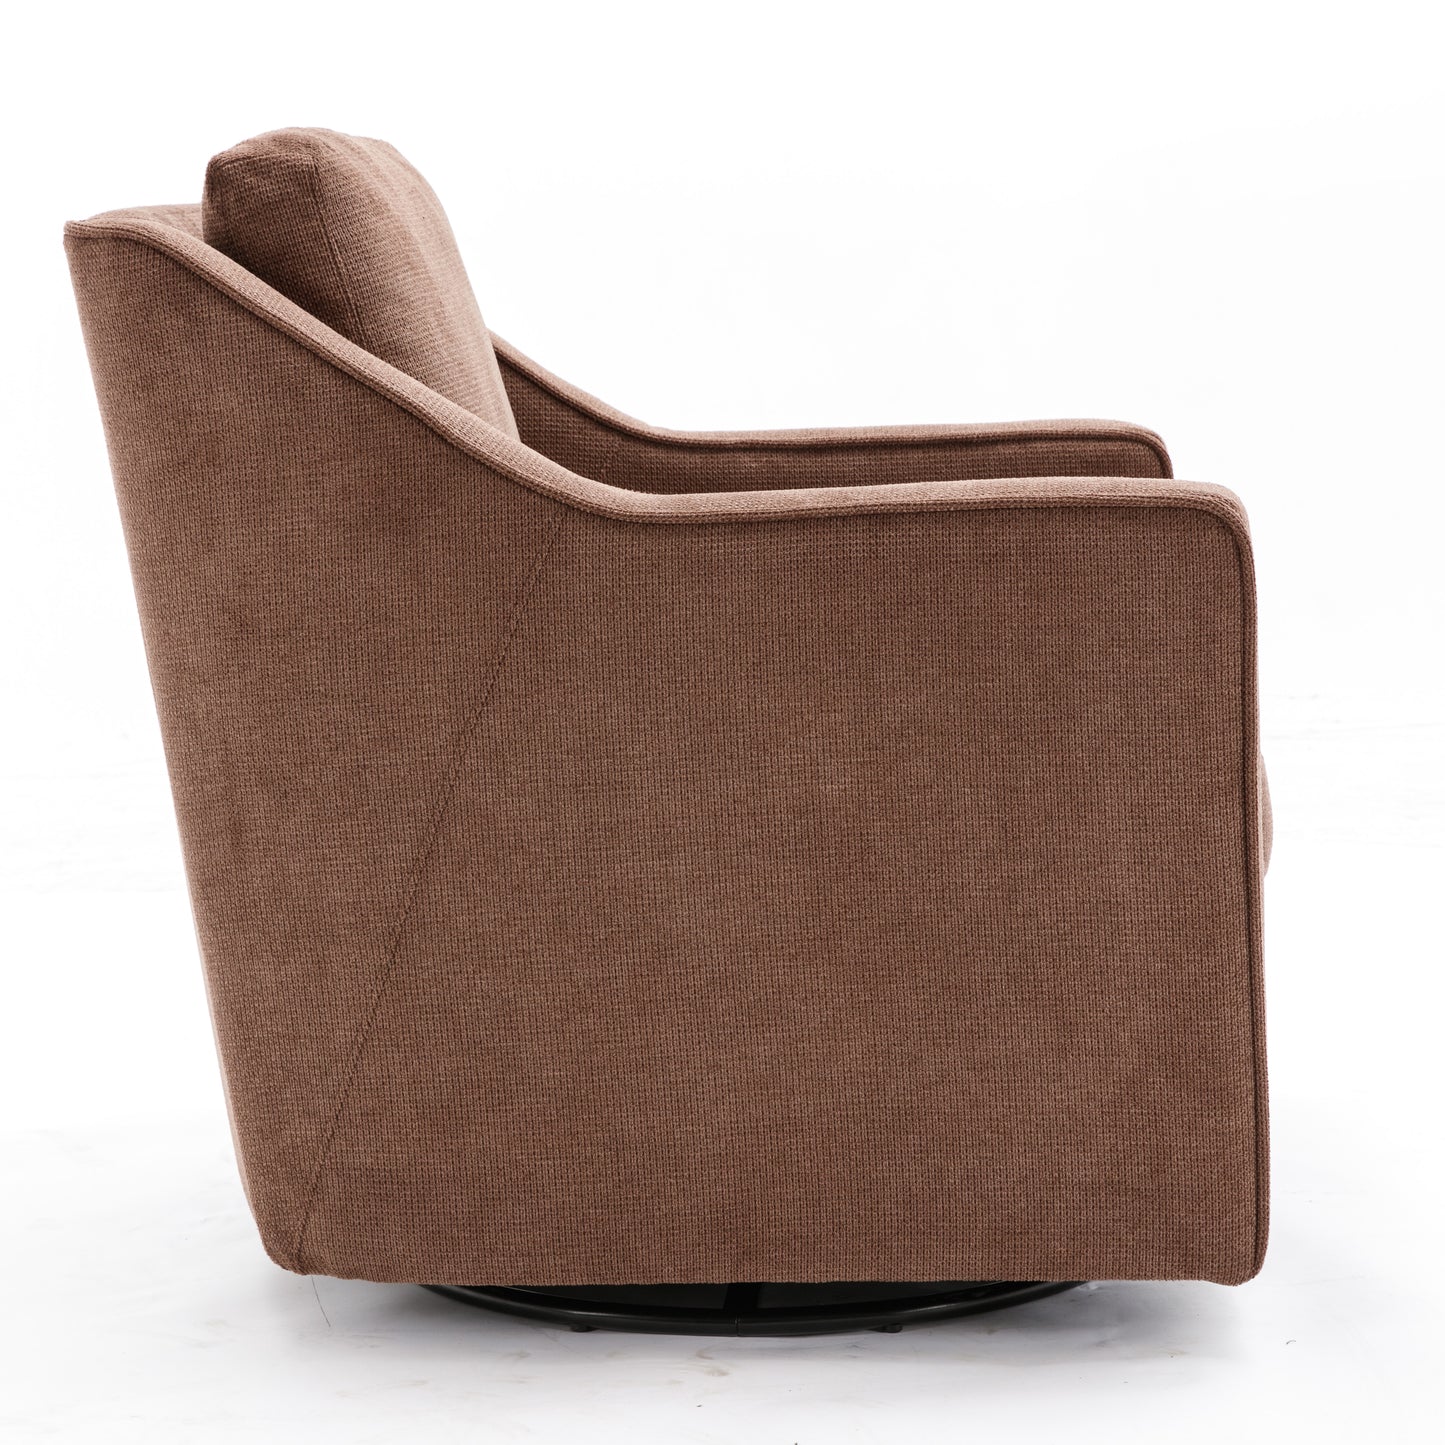 COLAMY 360° Swivel Accent Chair Upholstered Fabric Leisure Armchair